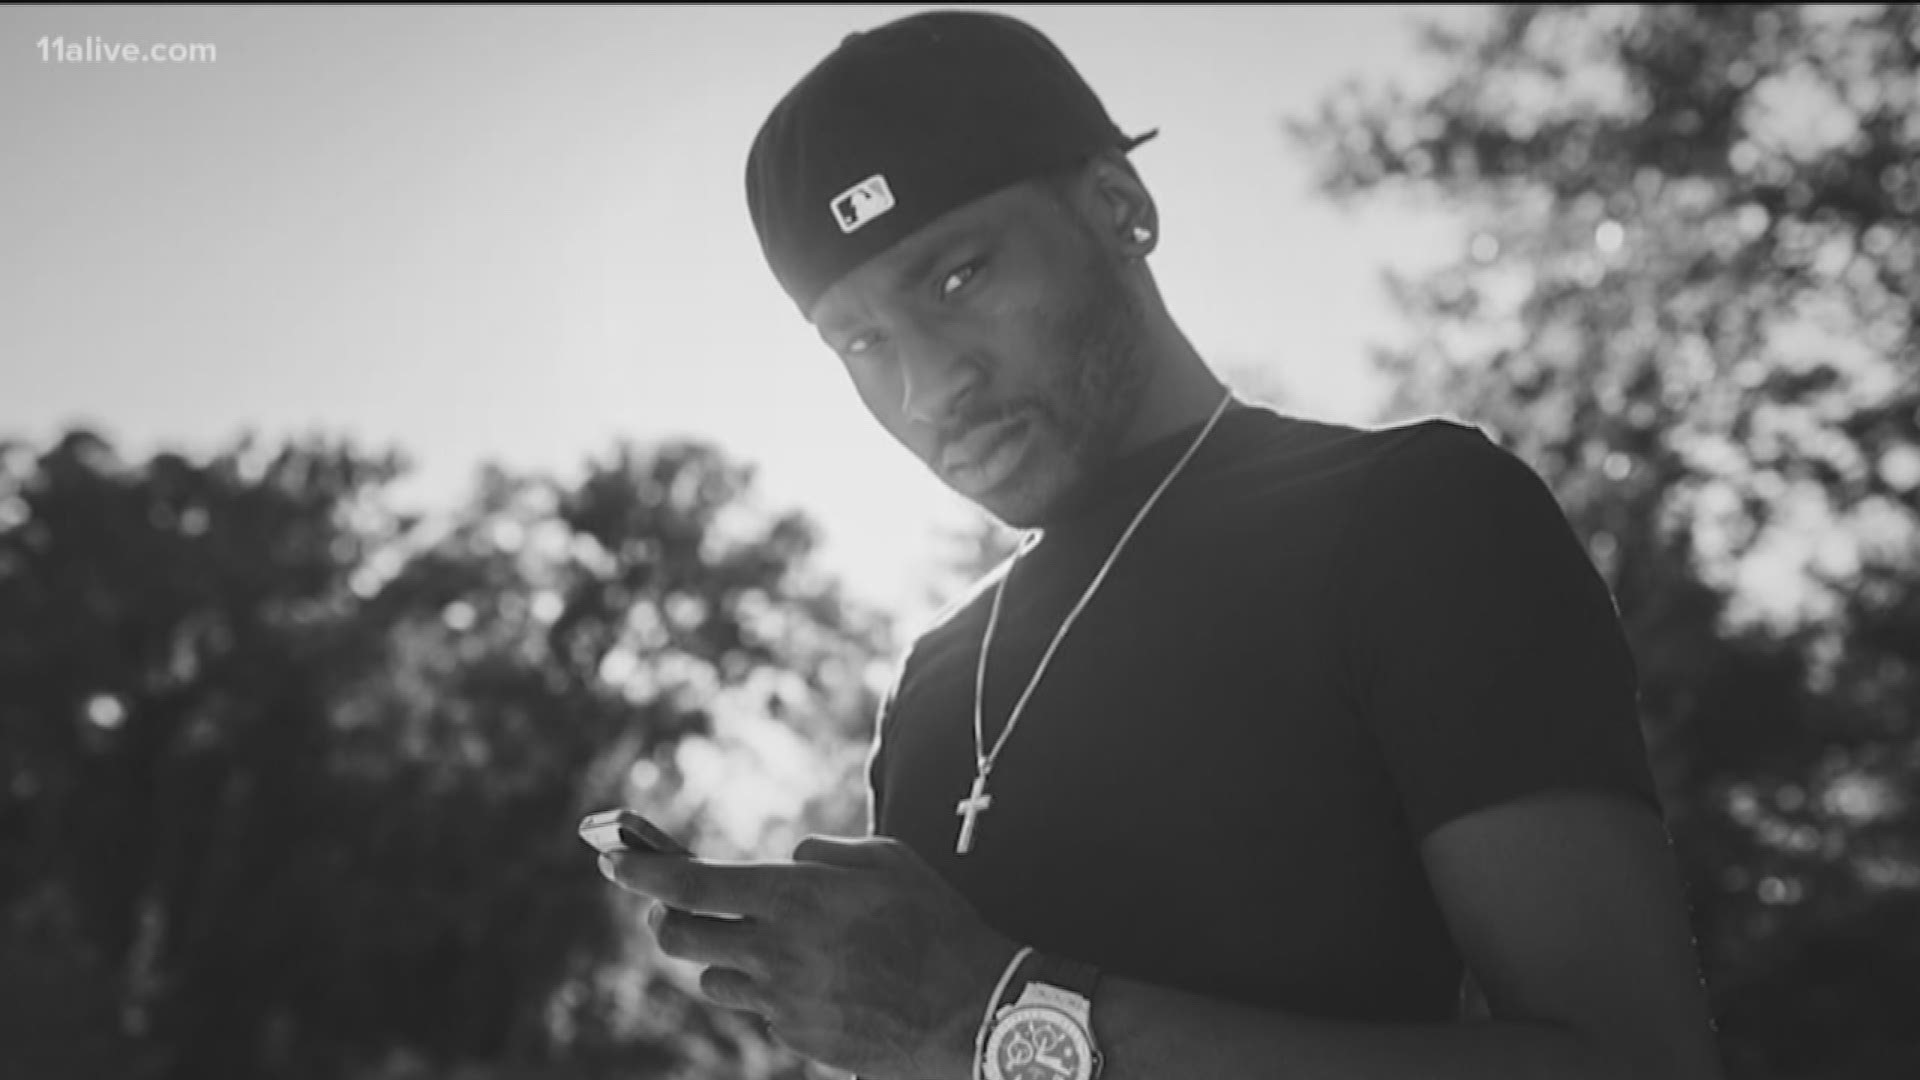 Bankroll Fresh murder case closed, 2 years after his deathalive.com